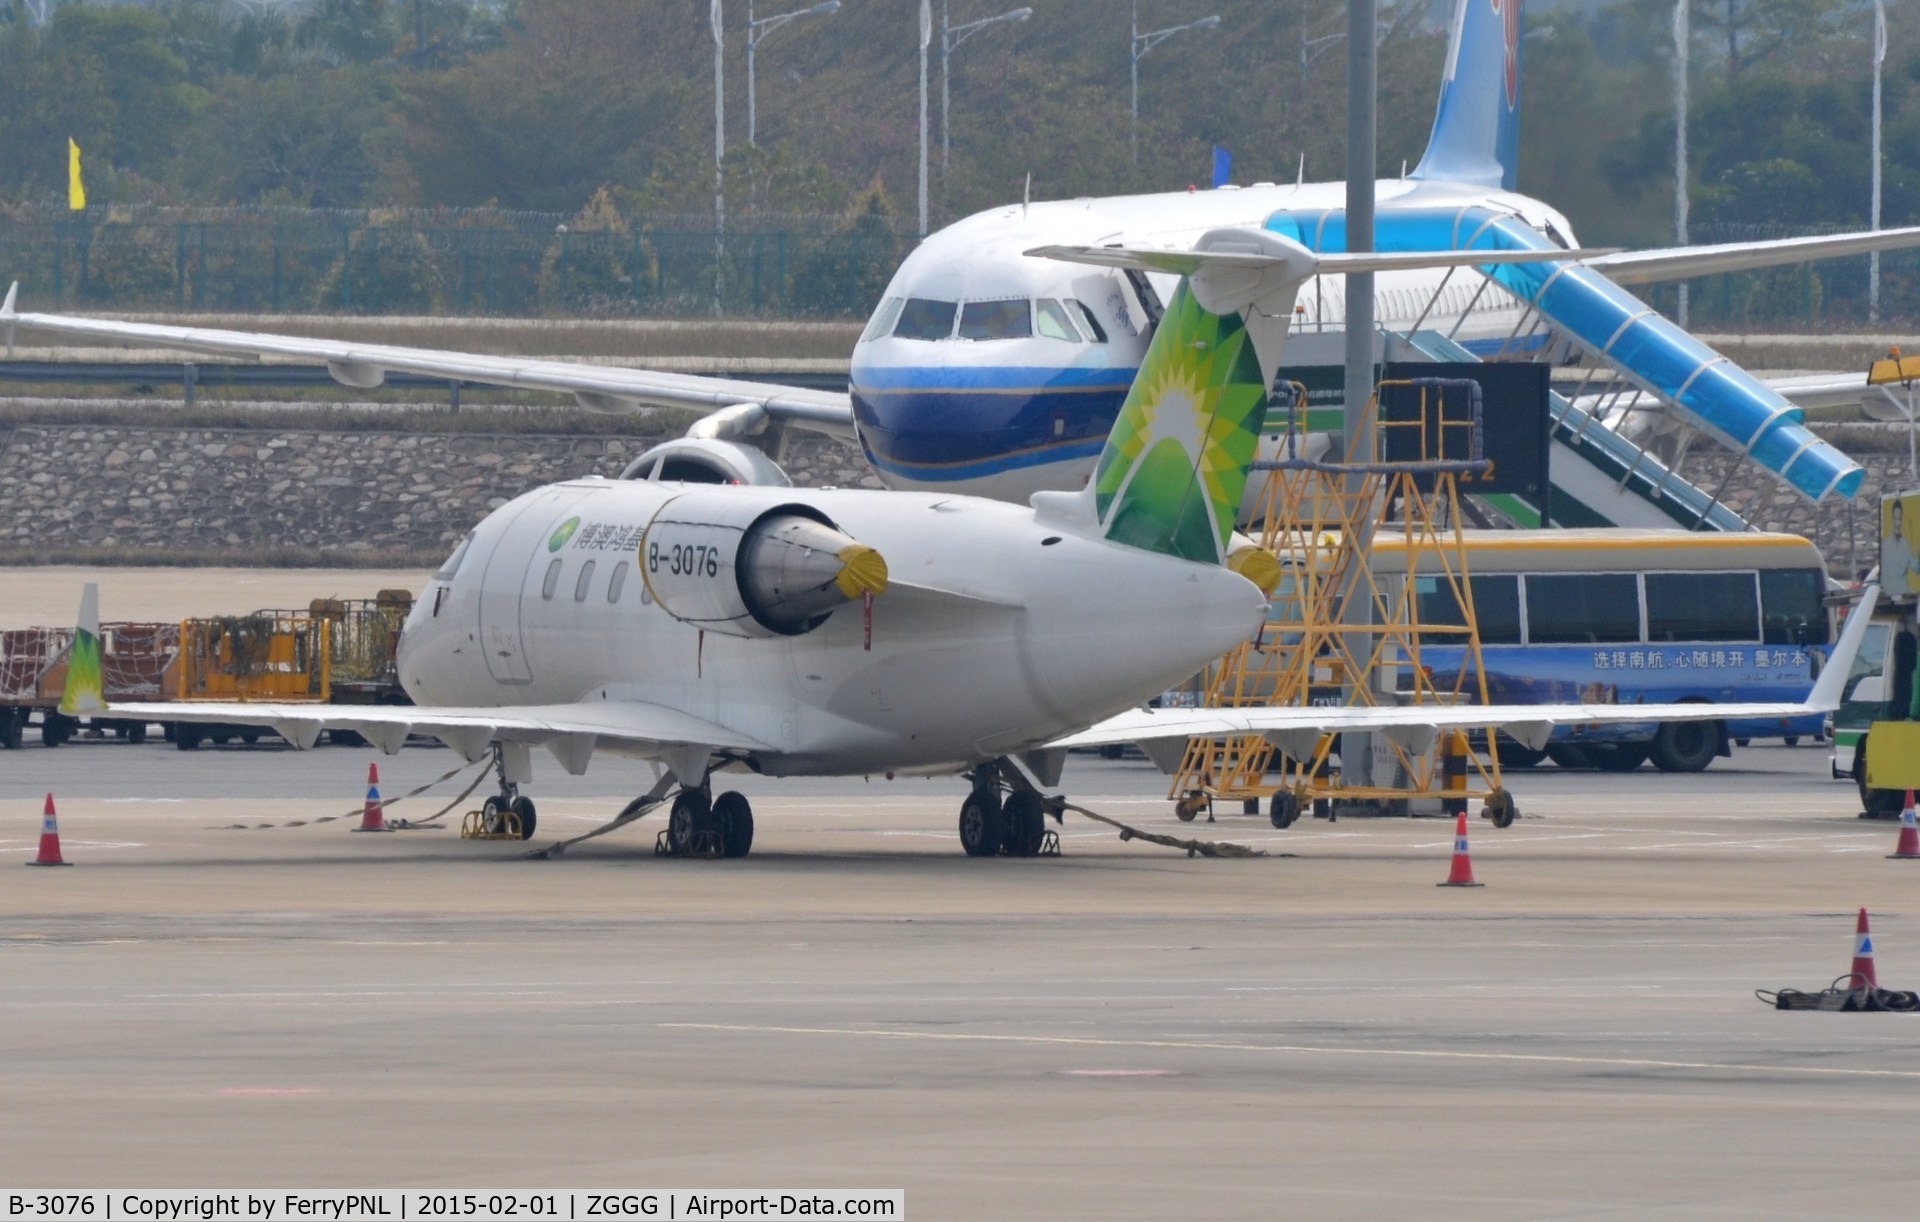 B-3076, 2002 Bombardier CRJ-200LR (CL-600-2B19) C/N 7690, CL605 parked and strapped up at Guangzhou.